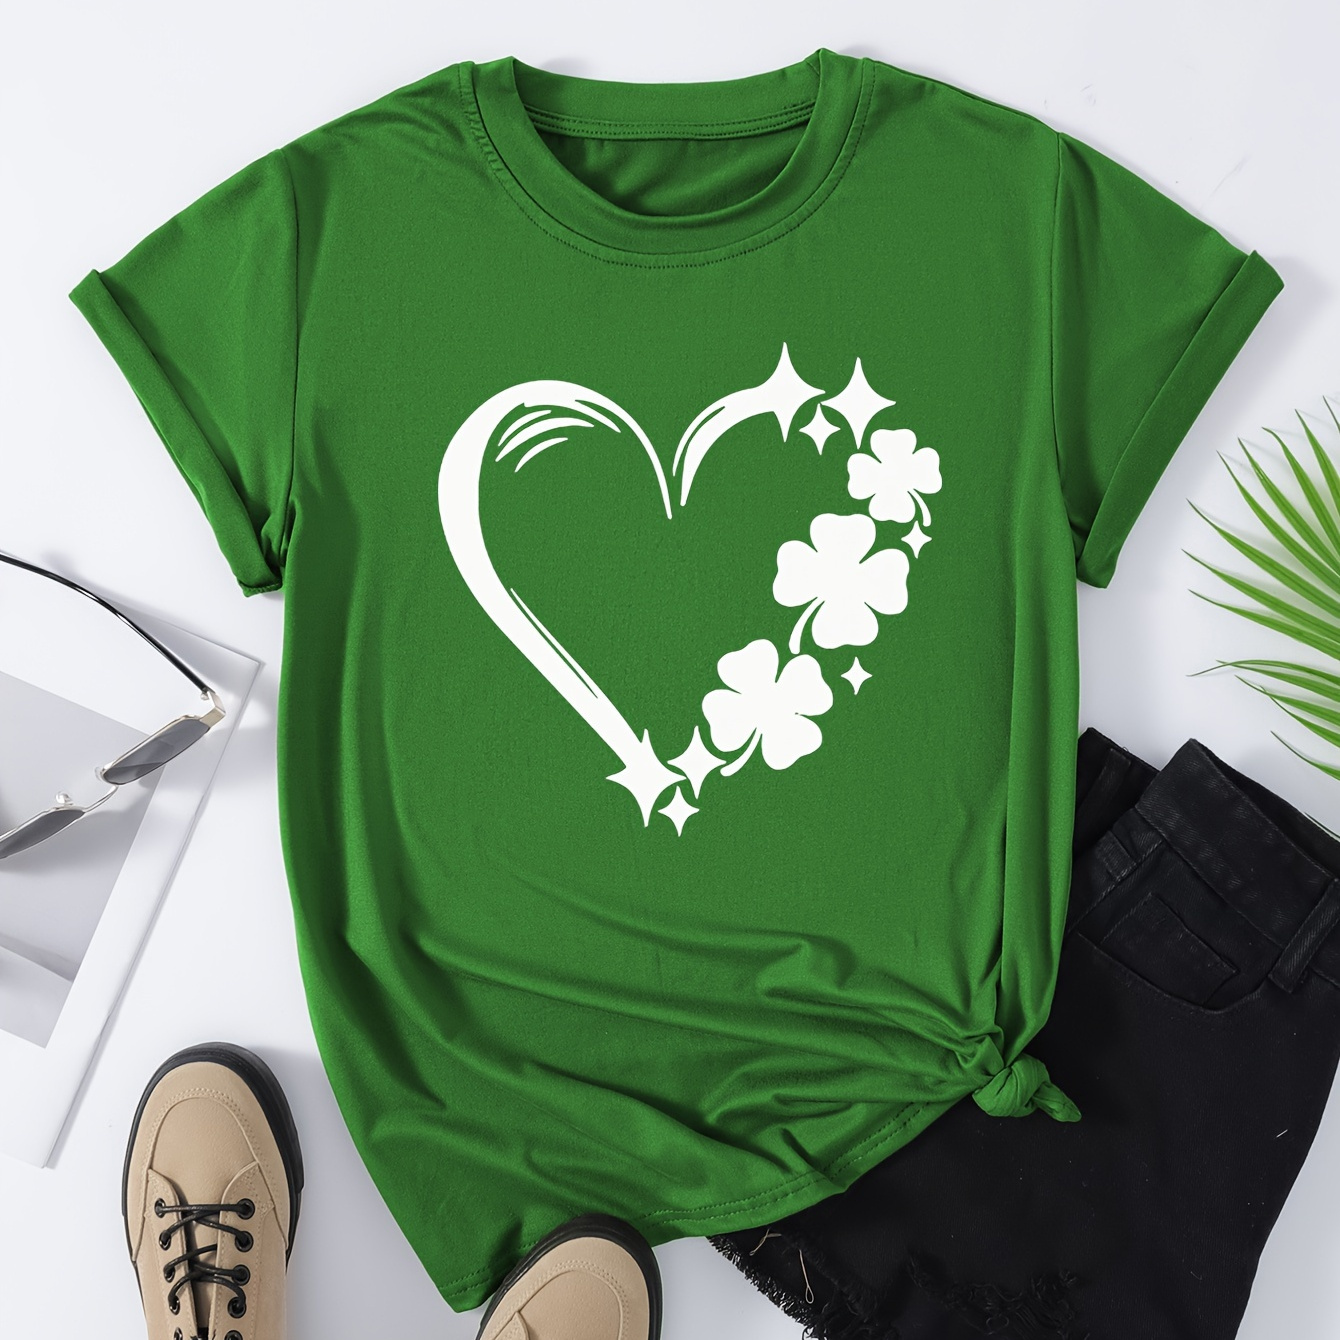 

Happy St. Patrick's Day & Heart Graphic T-shirt, Casual Short Sleeve Crew Neck Tops, Casual Every Day Tops, Women's Clothing